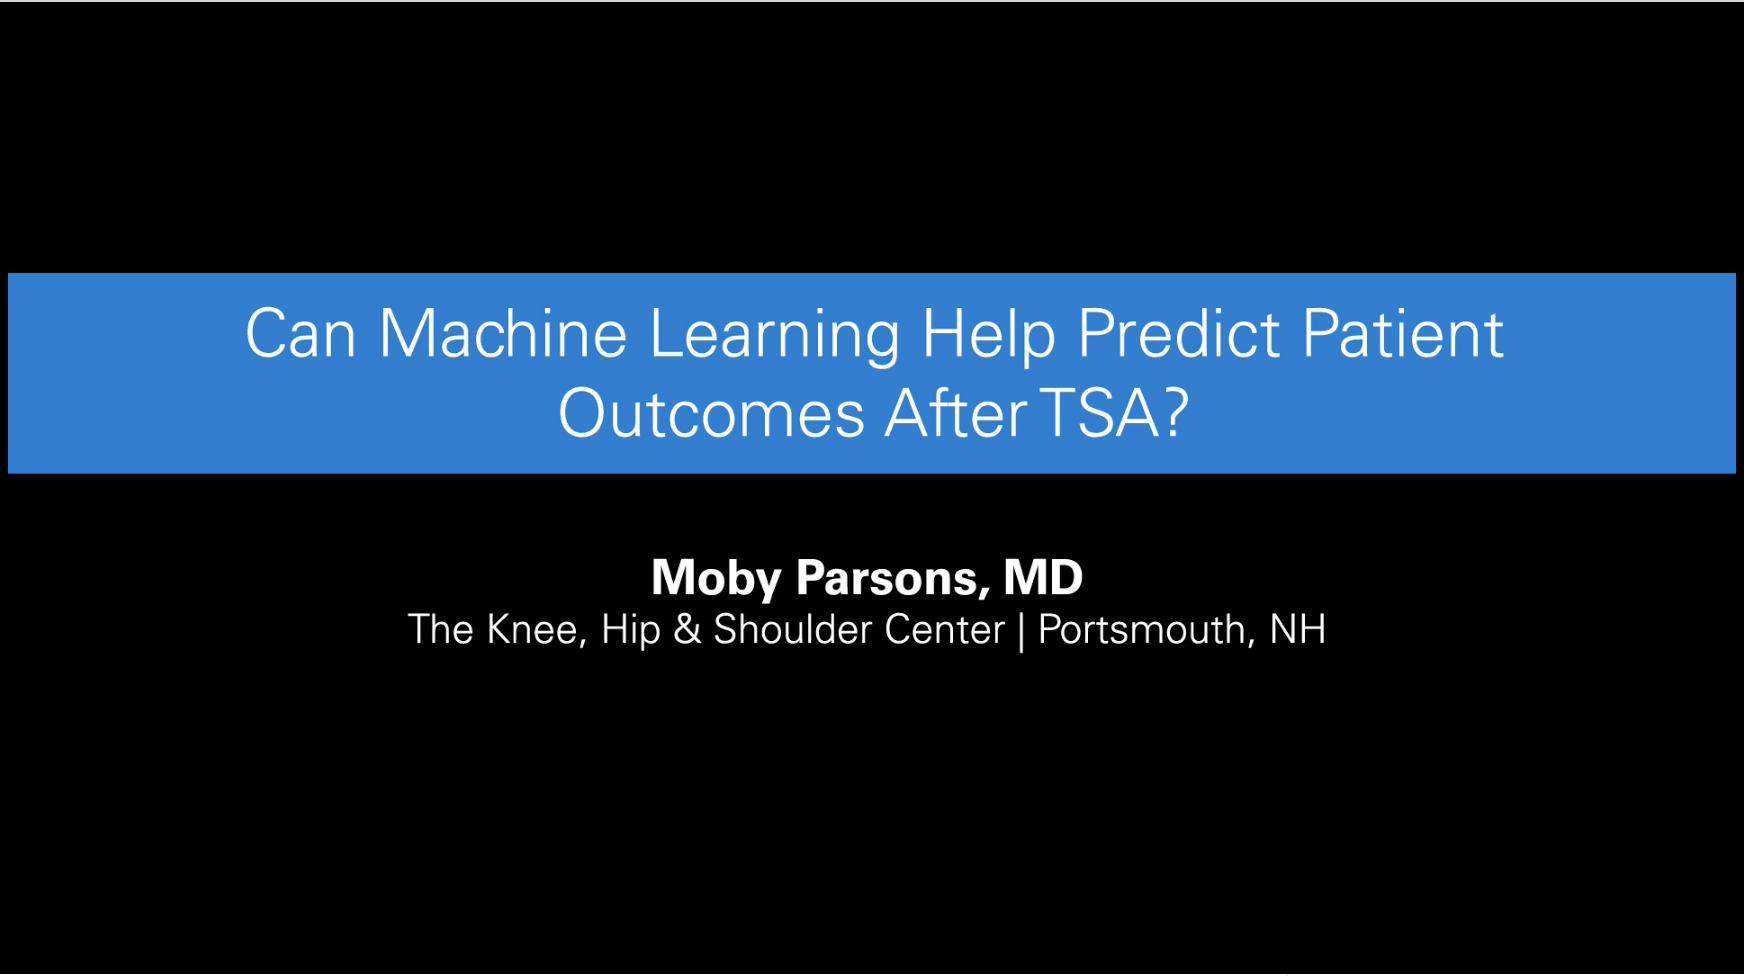 Can Machine Learning Help Predict Patient Outcomes After TSA?